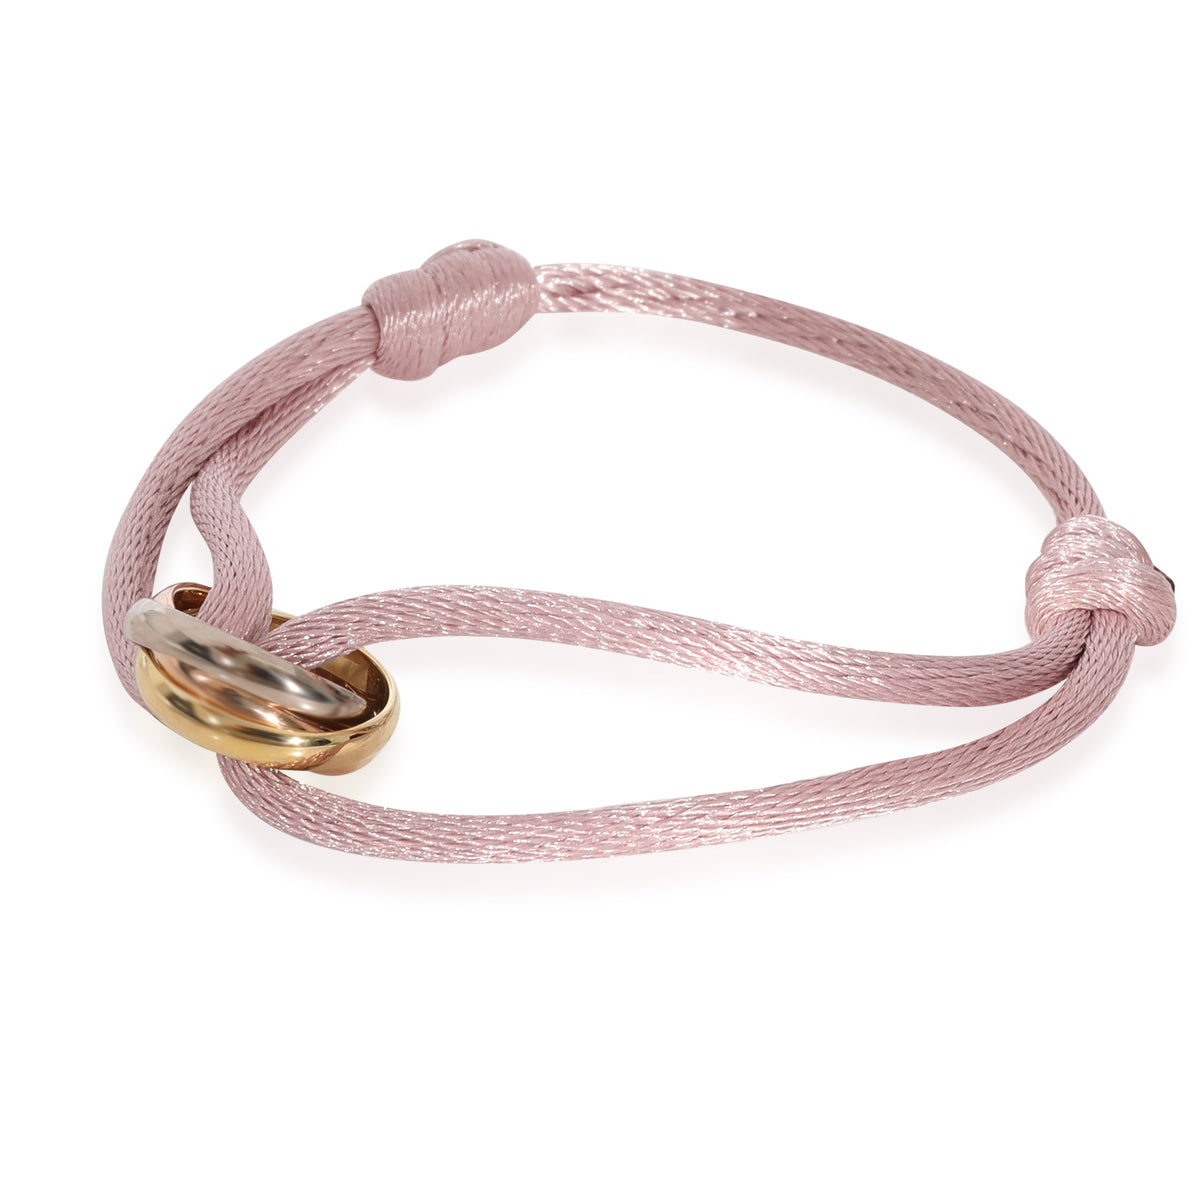 Cartier Trinity Bracelet On A Pink Cord in 18k 3 Tone Gold